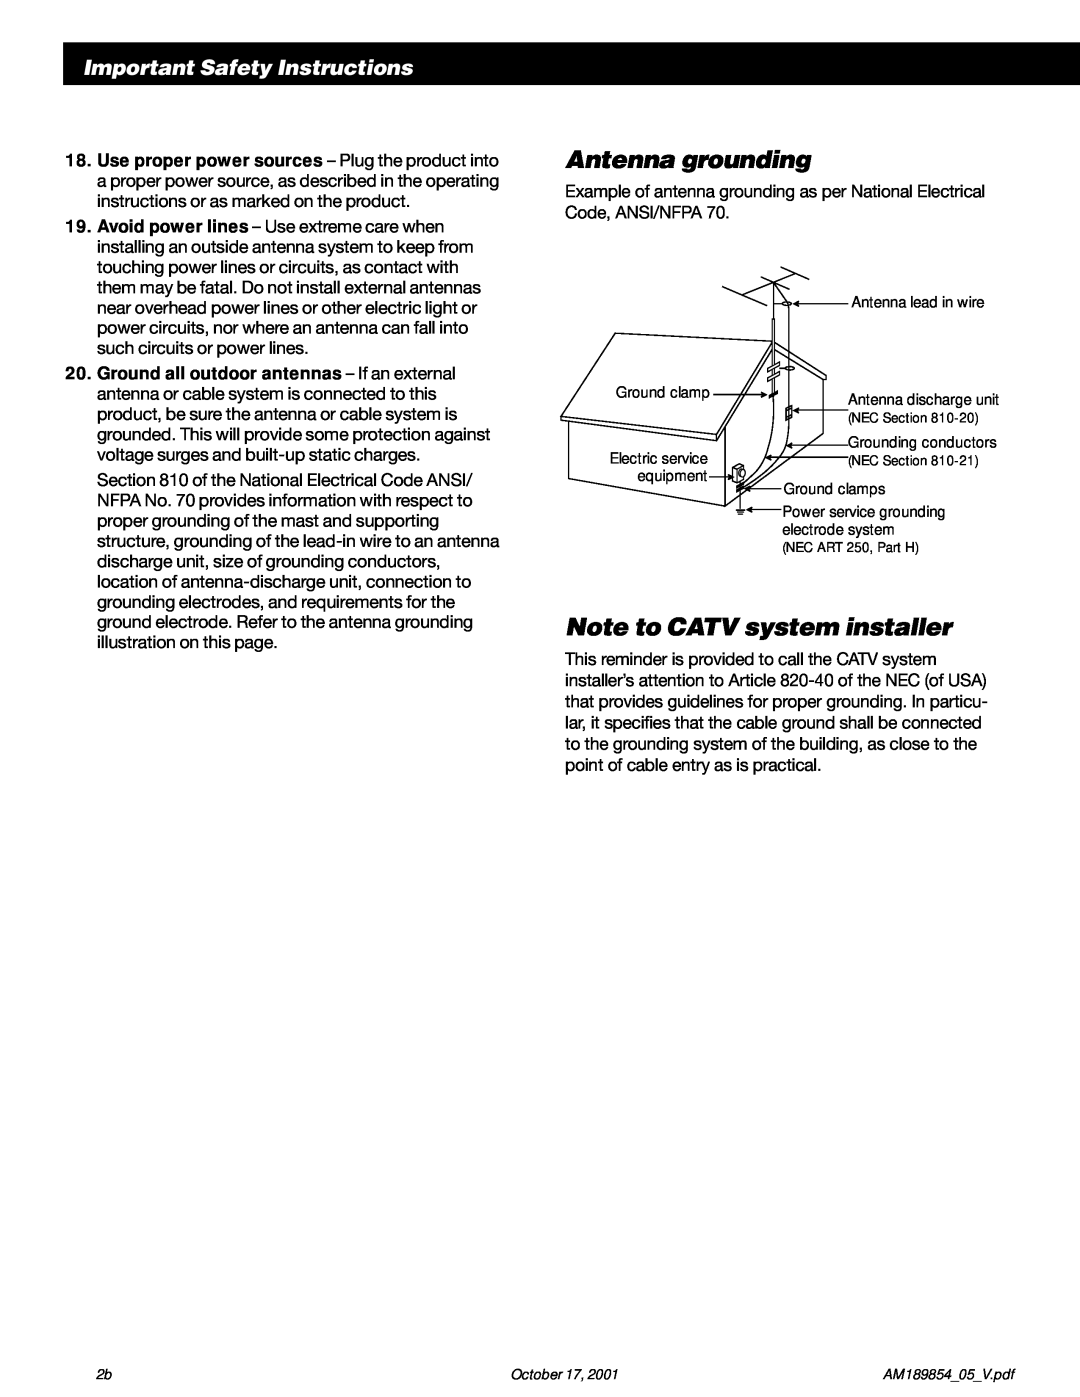 Bose 50 manual Antenna grounding, Note to CATV system installer, Important Safety Instructions, Antenna lead in wire 